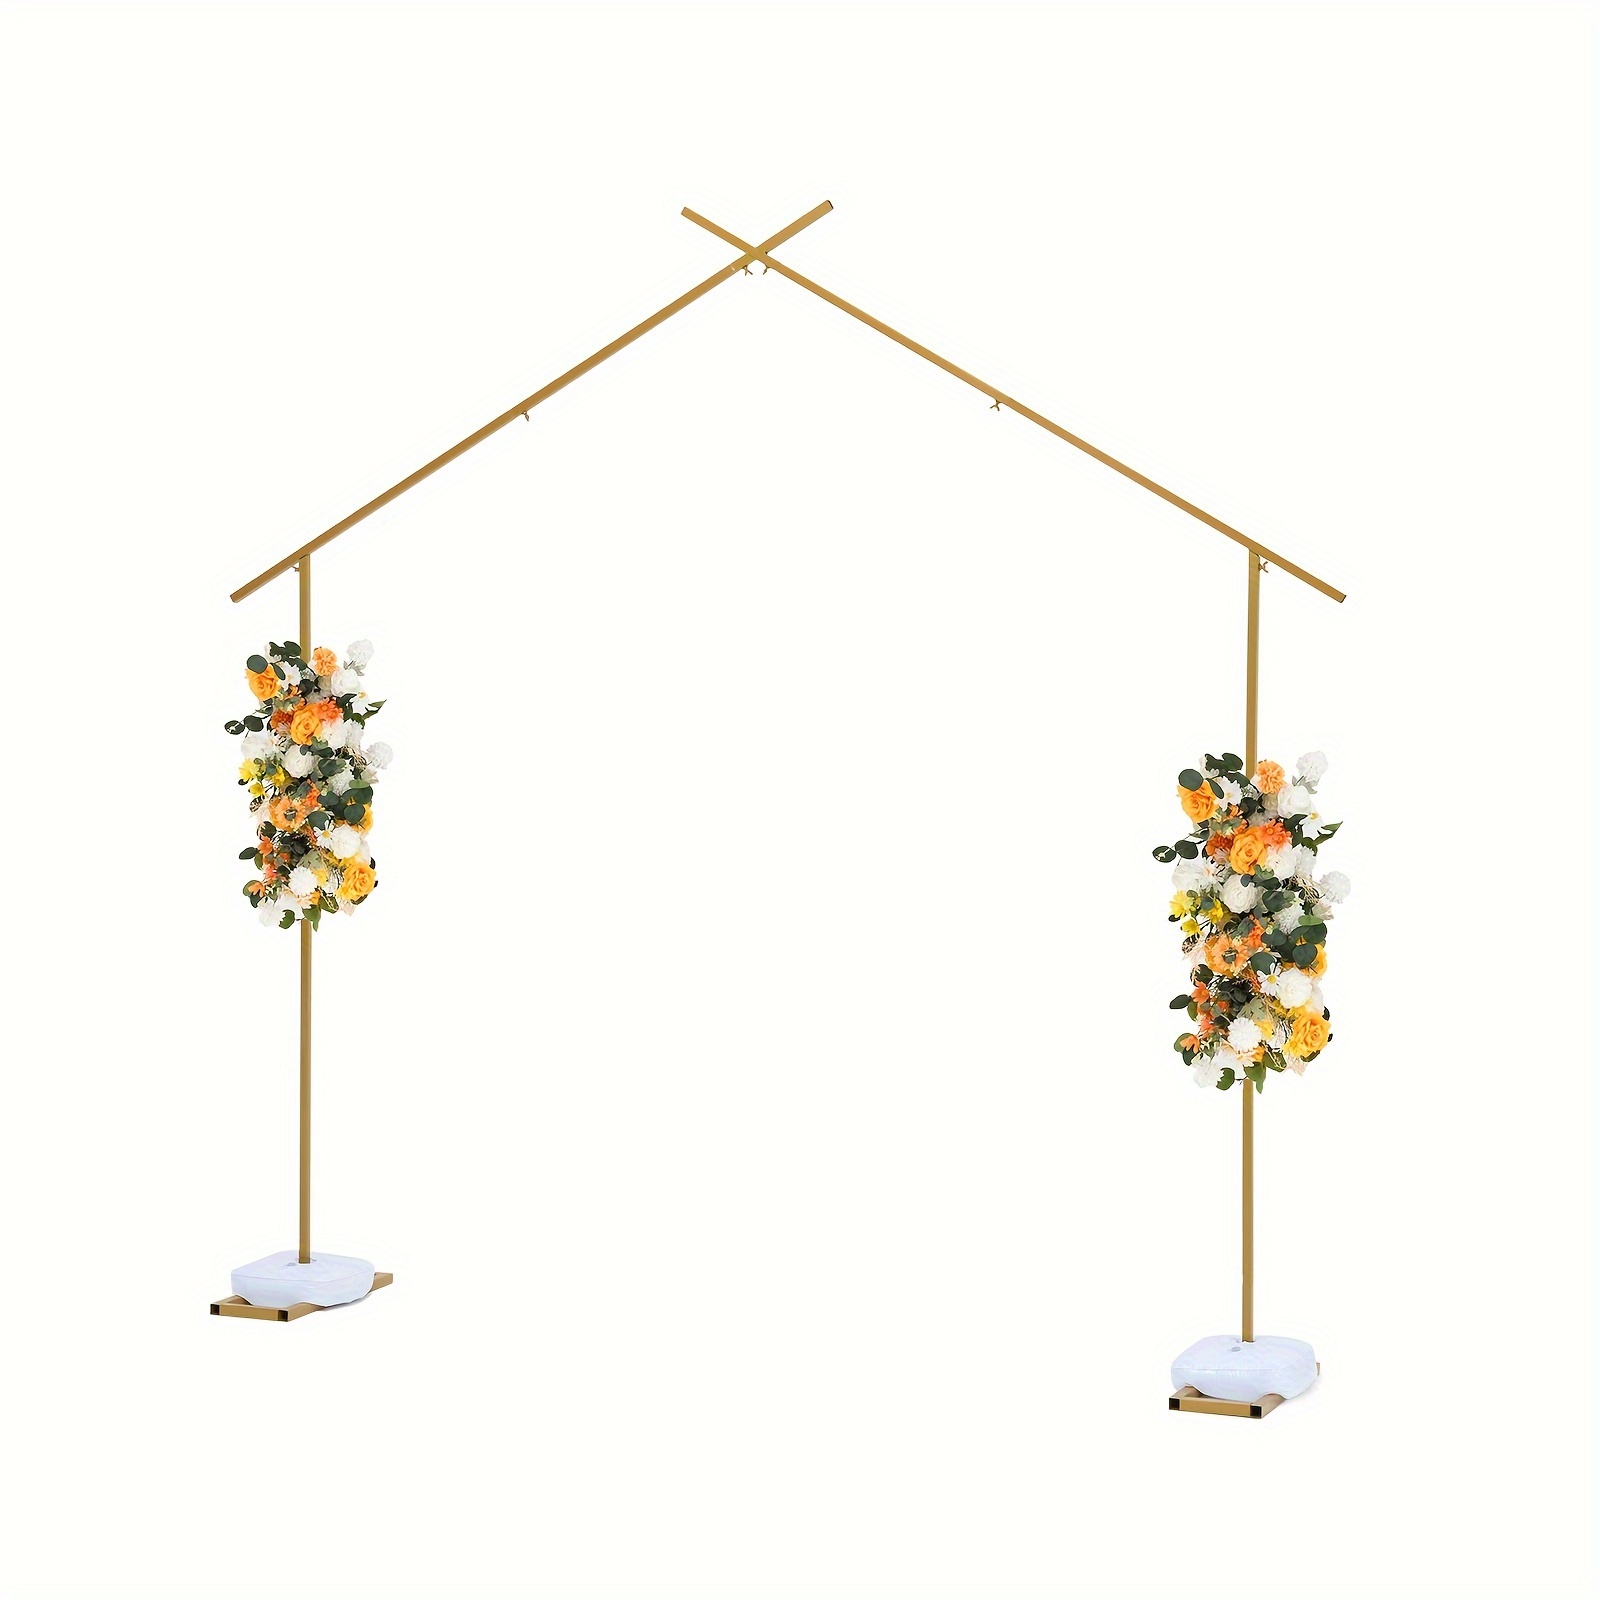 

9ft*7.97ft Gold Metal Wedding Arch For Ceremony, House Shape Arch Backdrop Stand Arch Poles For Birthday Party Bridal Baby Shower Decoration